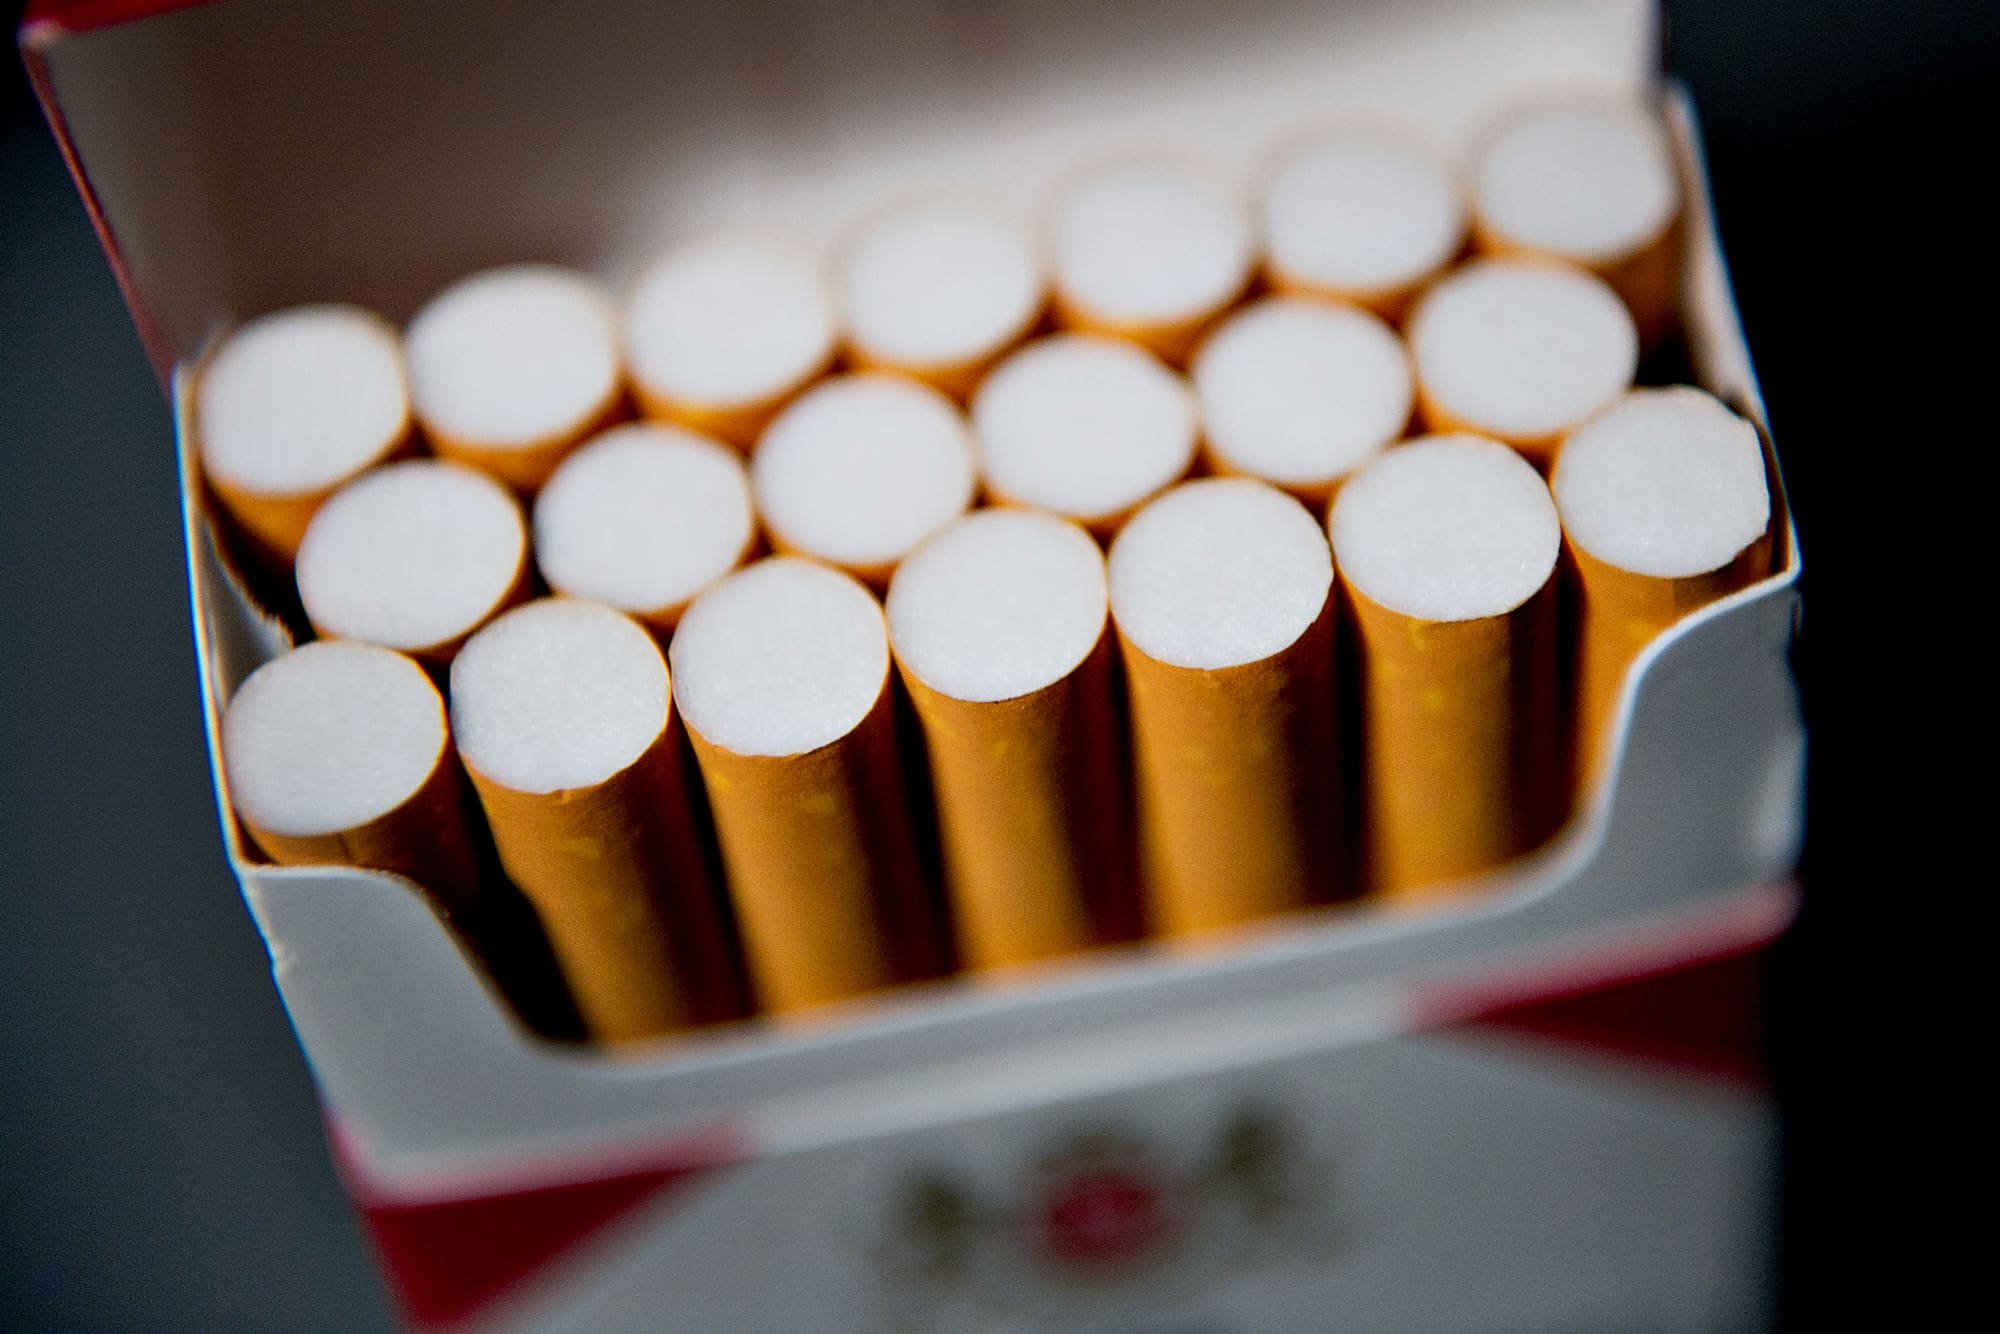 Altria Said Cigarette Industry Shipments Flattened In 2020 Most cigarettes contain a reconstituted tobacco product known as sheet. altria said cigarette industry